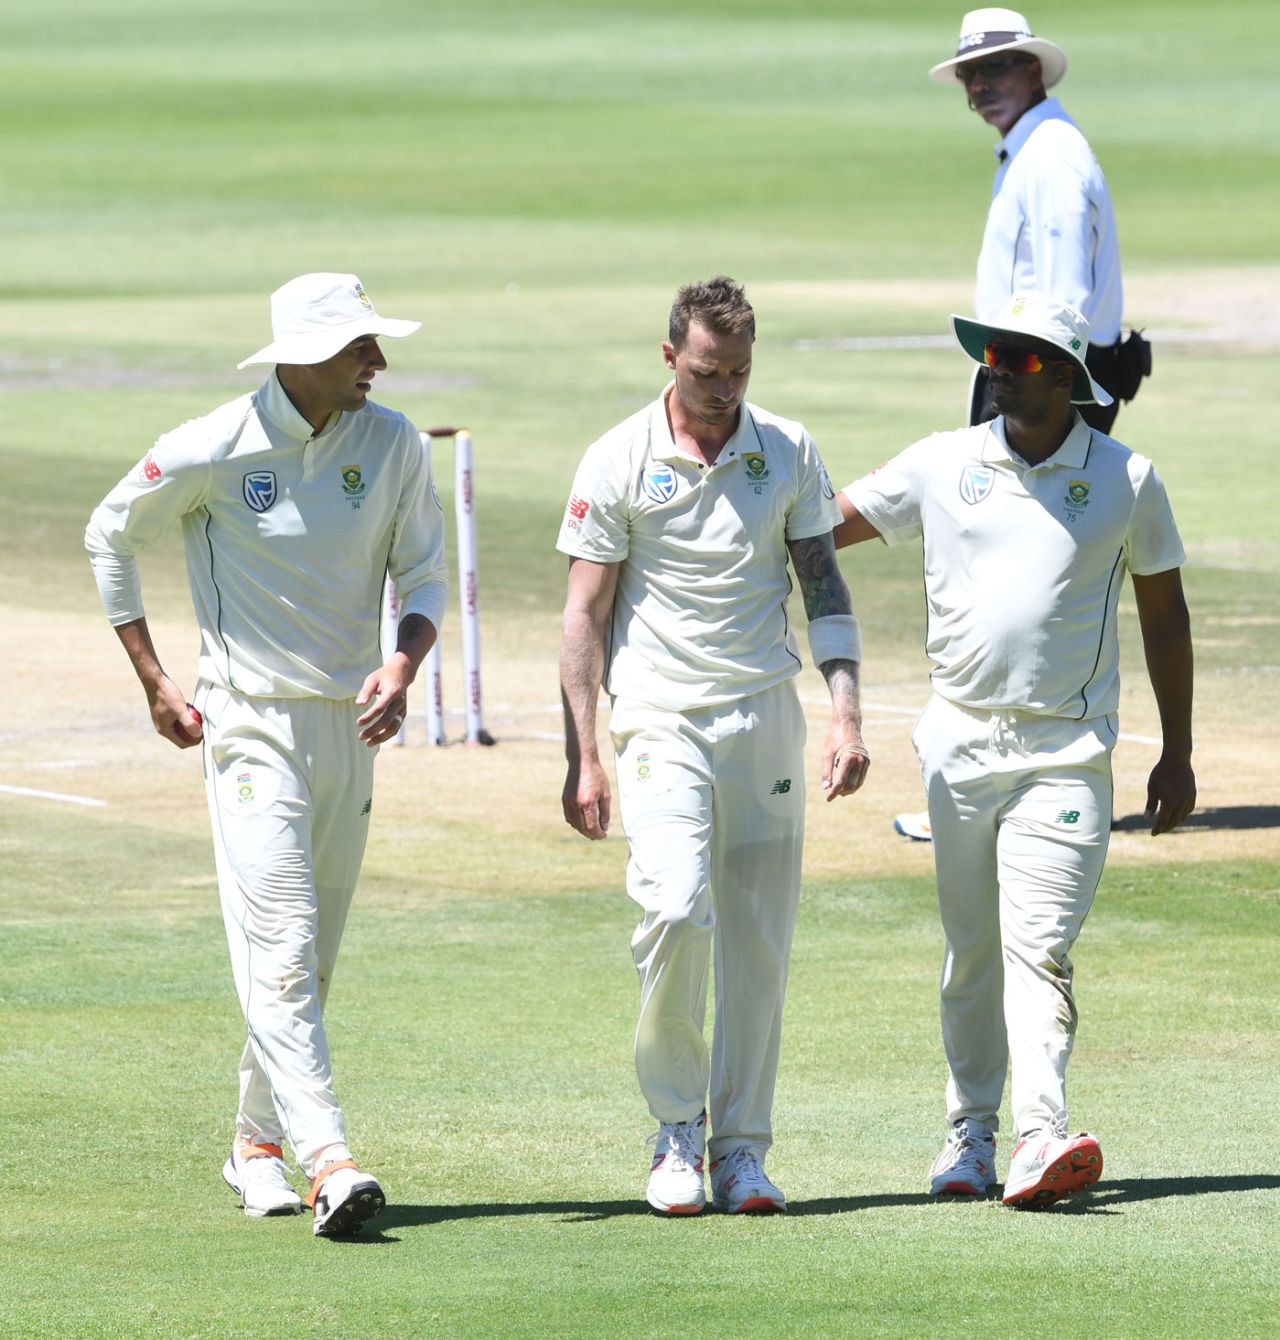 Dale Steyn is given a word of encouragement from his fellow seamers after a dropped catch, South Africa v Pakistan, 3rd Test, Johannesburg, 2nd day, January 12, 2019